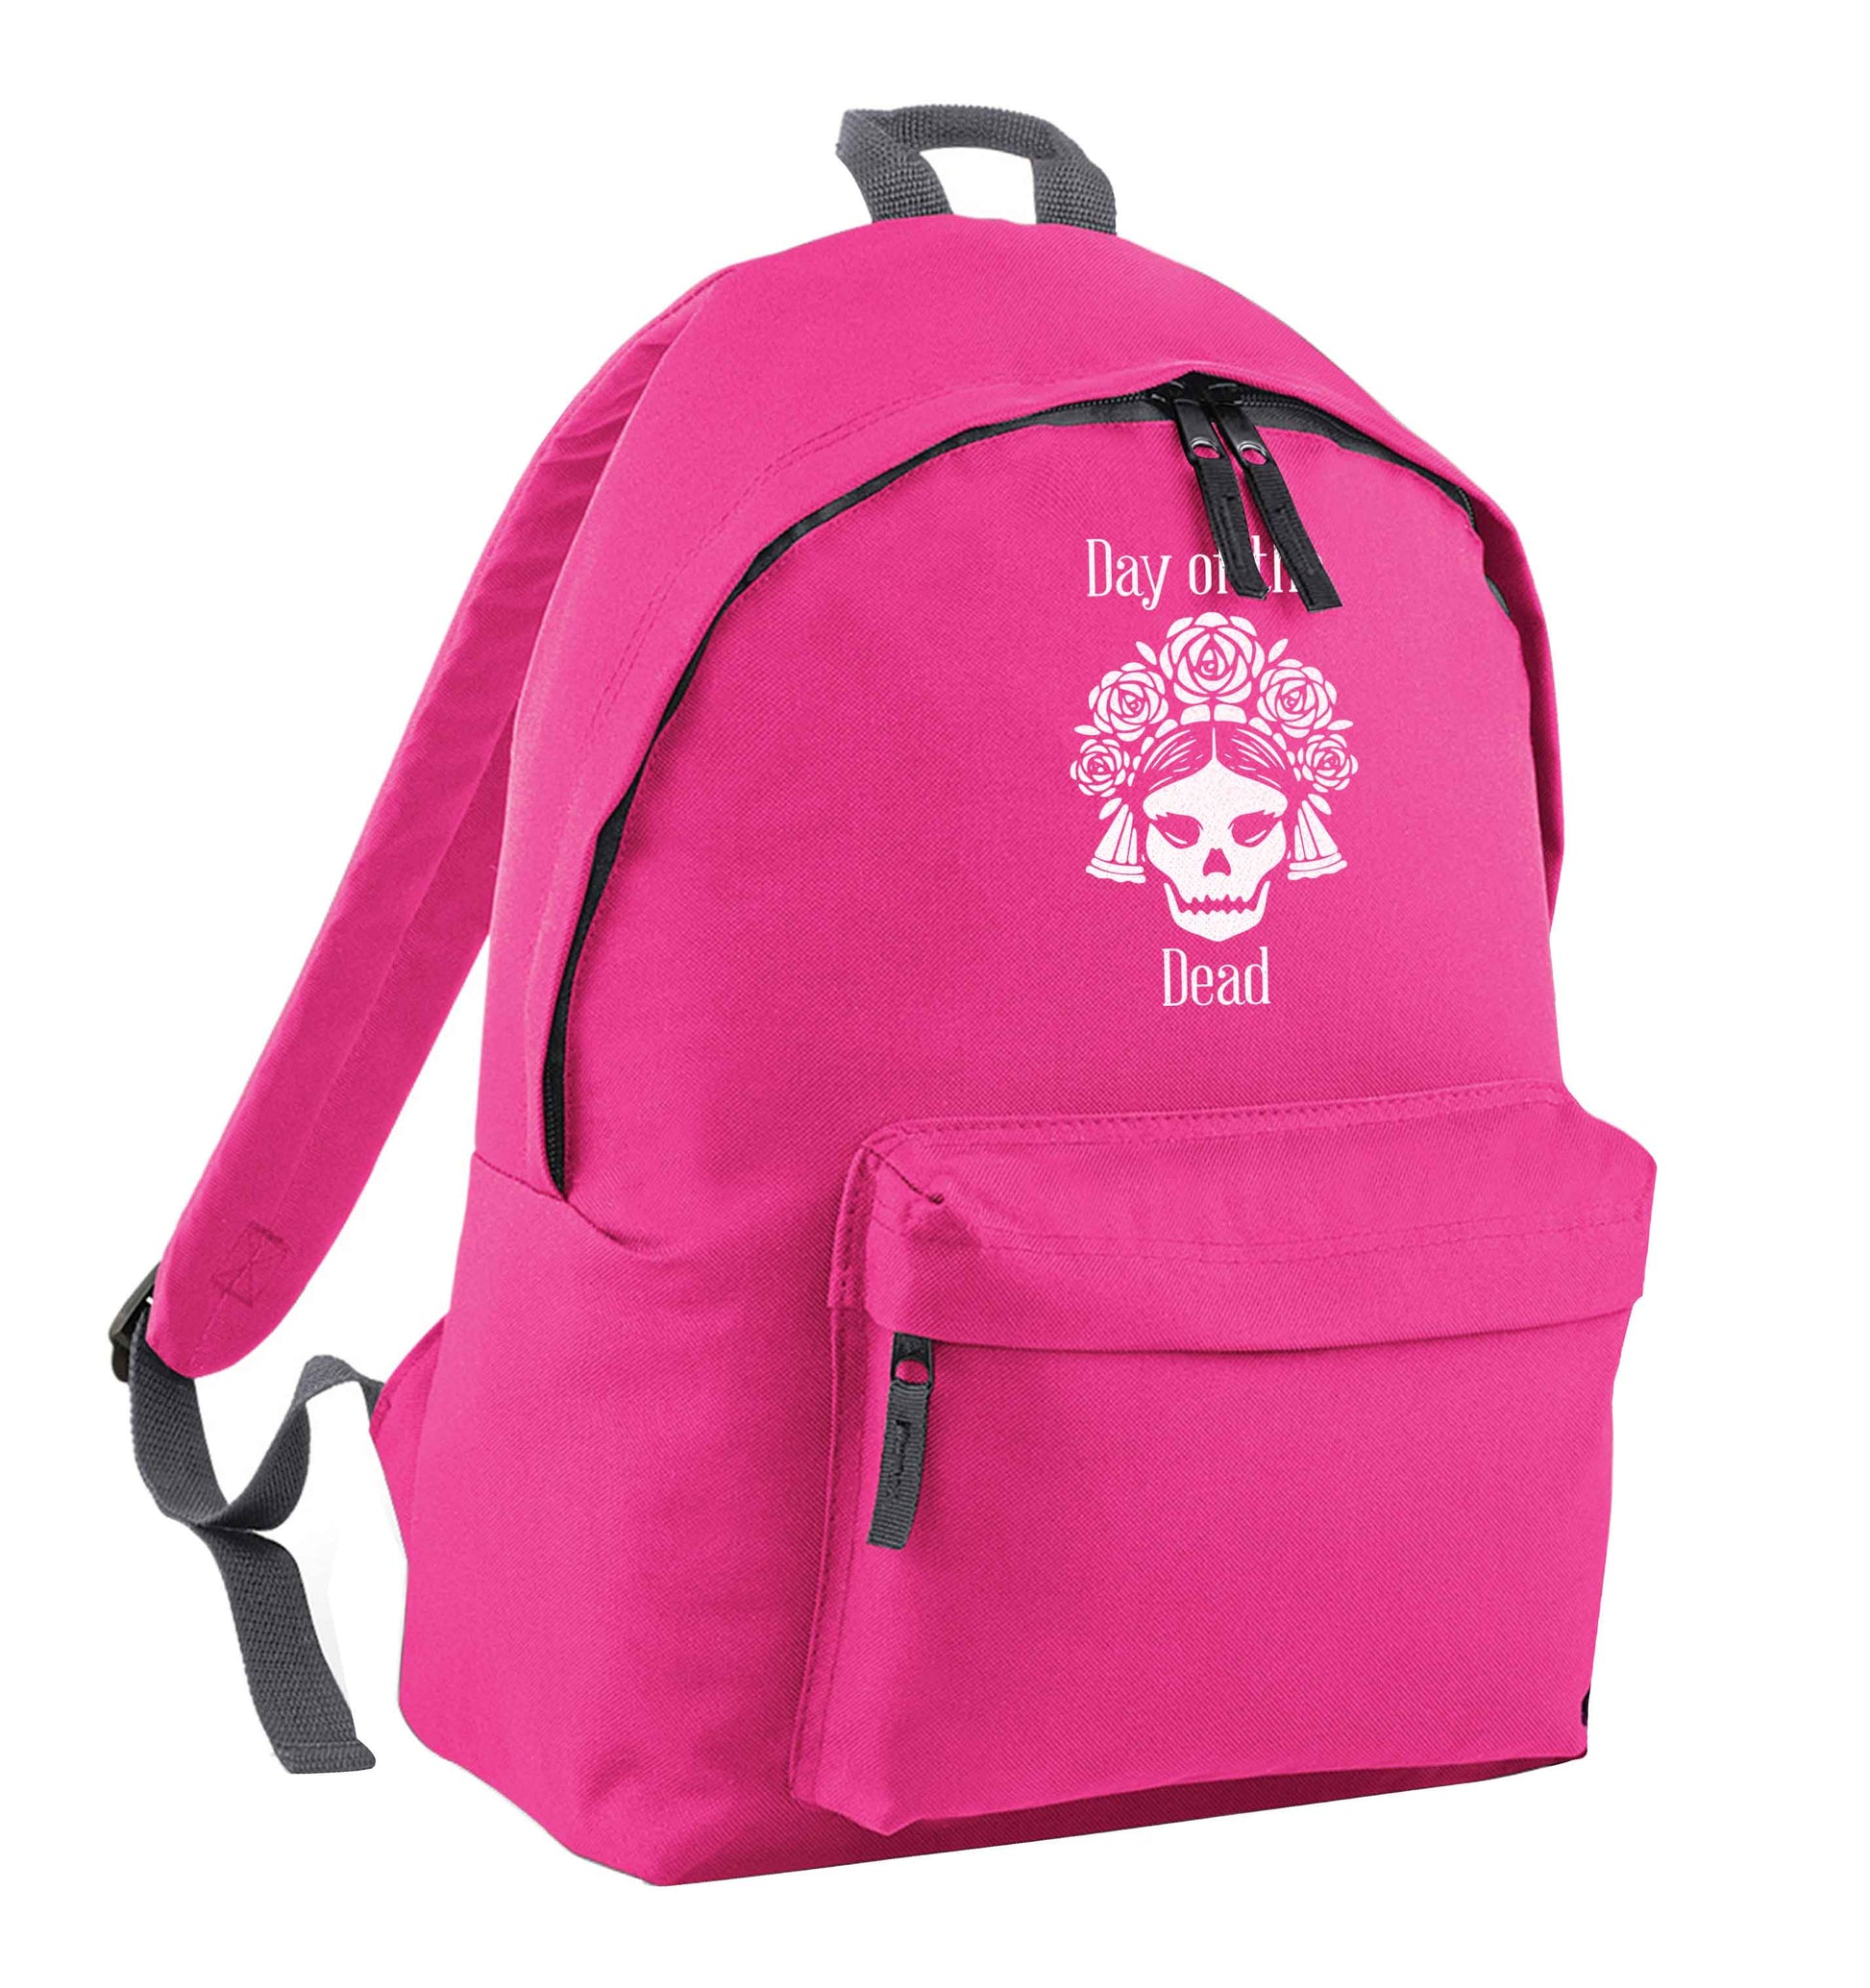 Day of the dead pink children's backpack